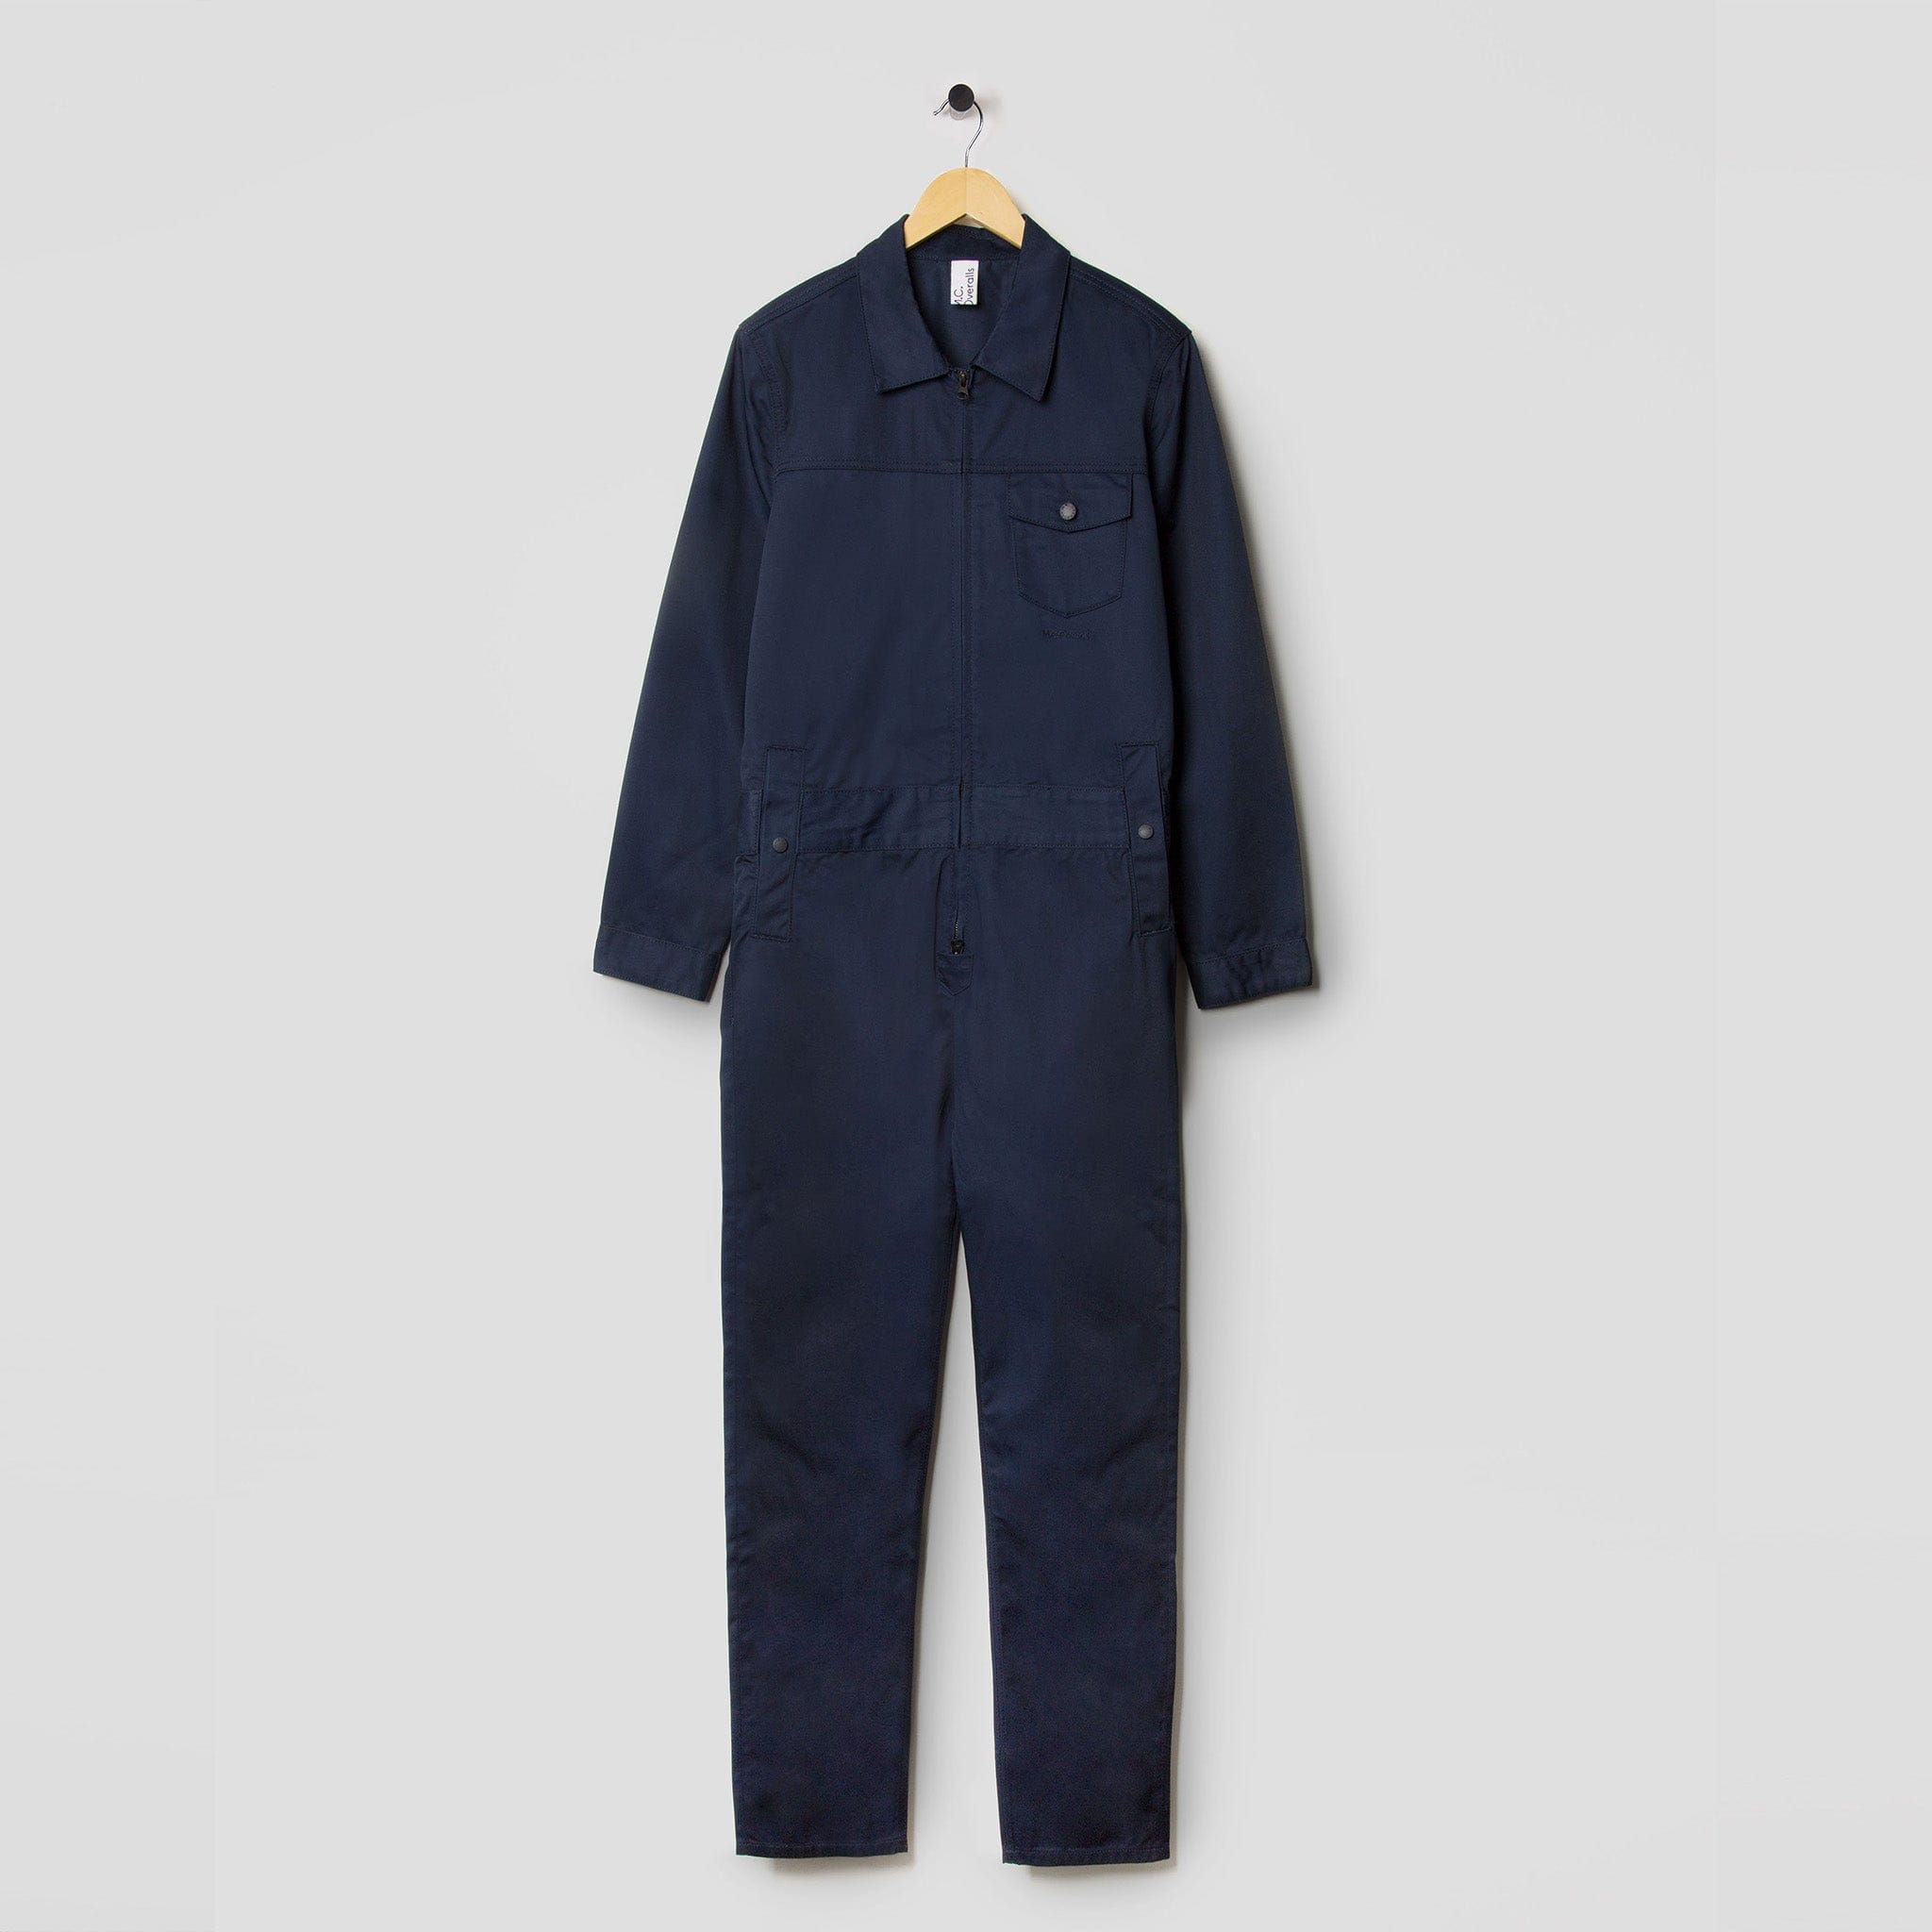 M.C.O's Polycotton Navy Blue Workwear Overalls for Men and Women.